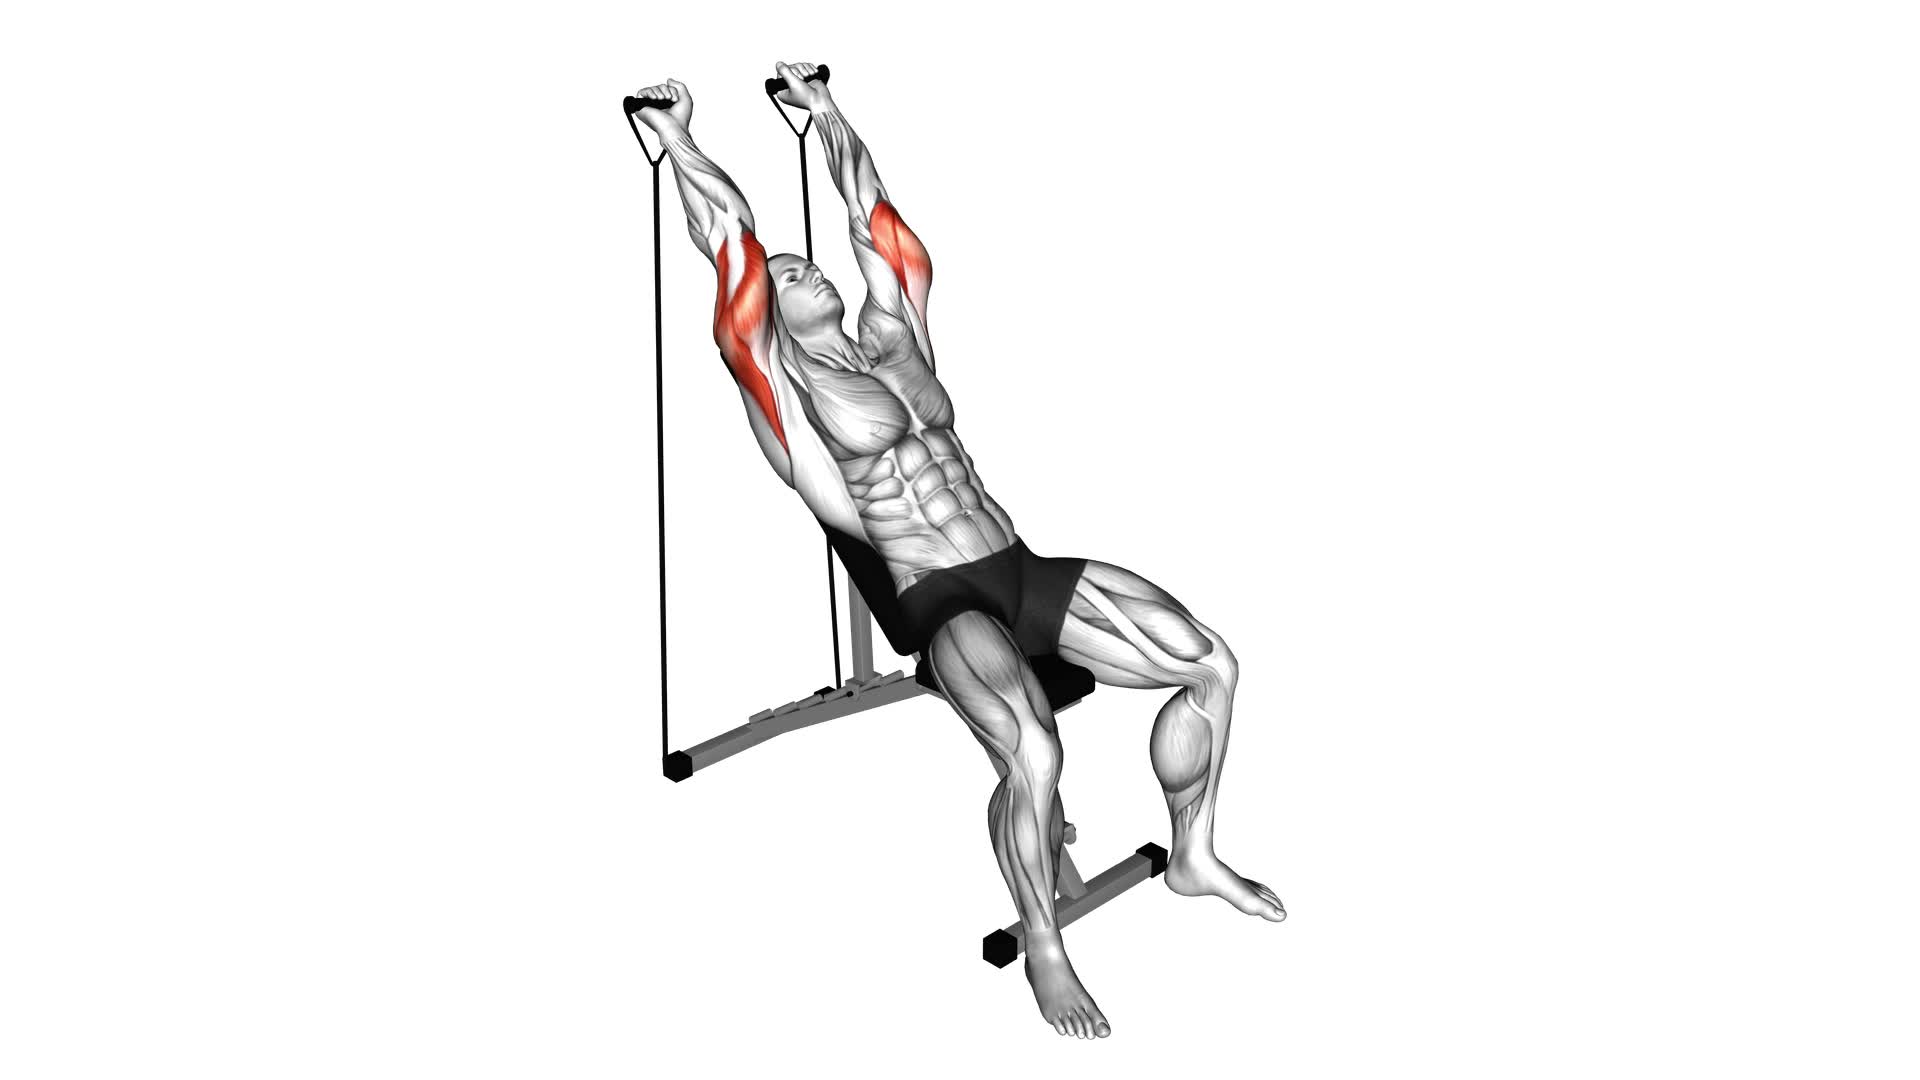 Band Incline Triceps Extension - Video Exercise Guide & Tips